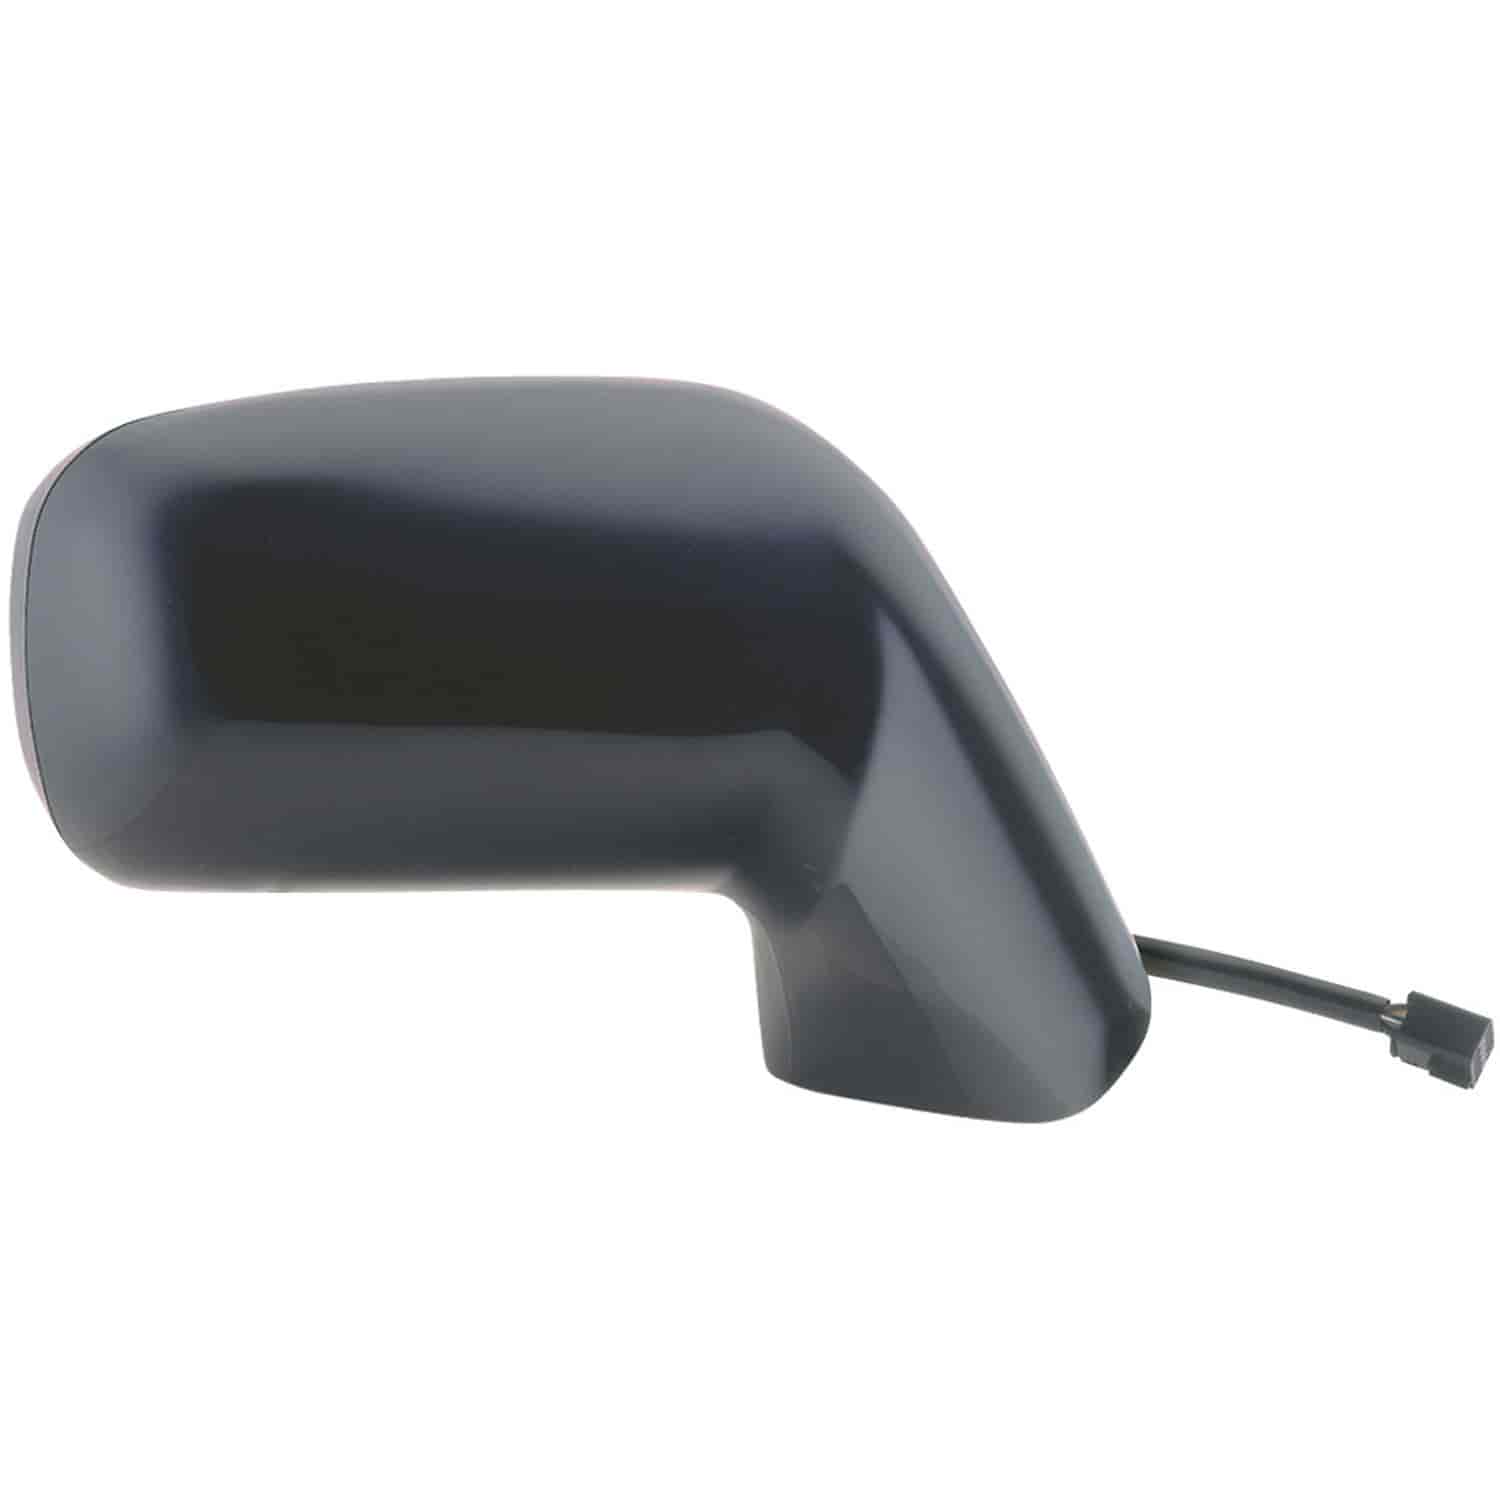 OEM Style Replacement mirror for 92-99 Pontiac Bonneville passenger side mirror tested to fit and fu